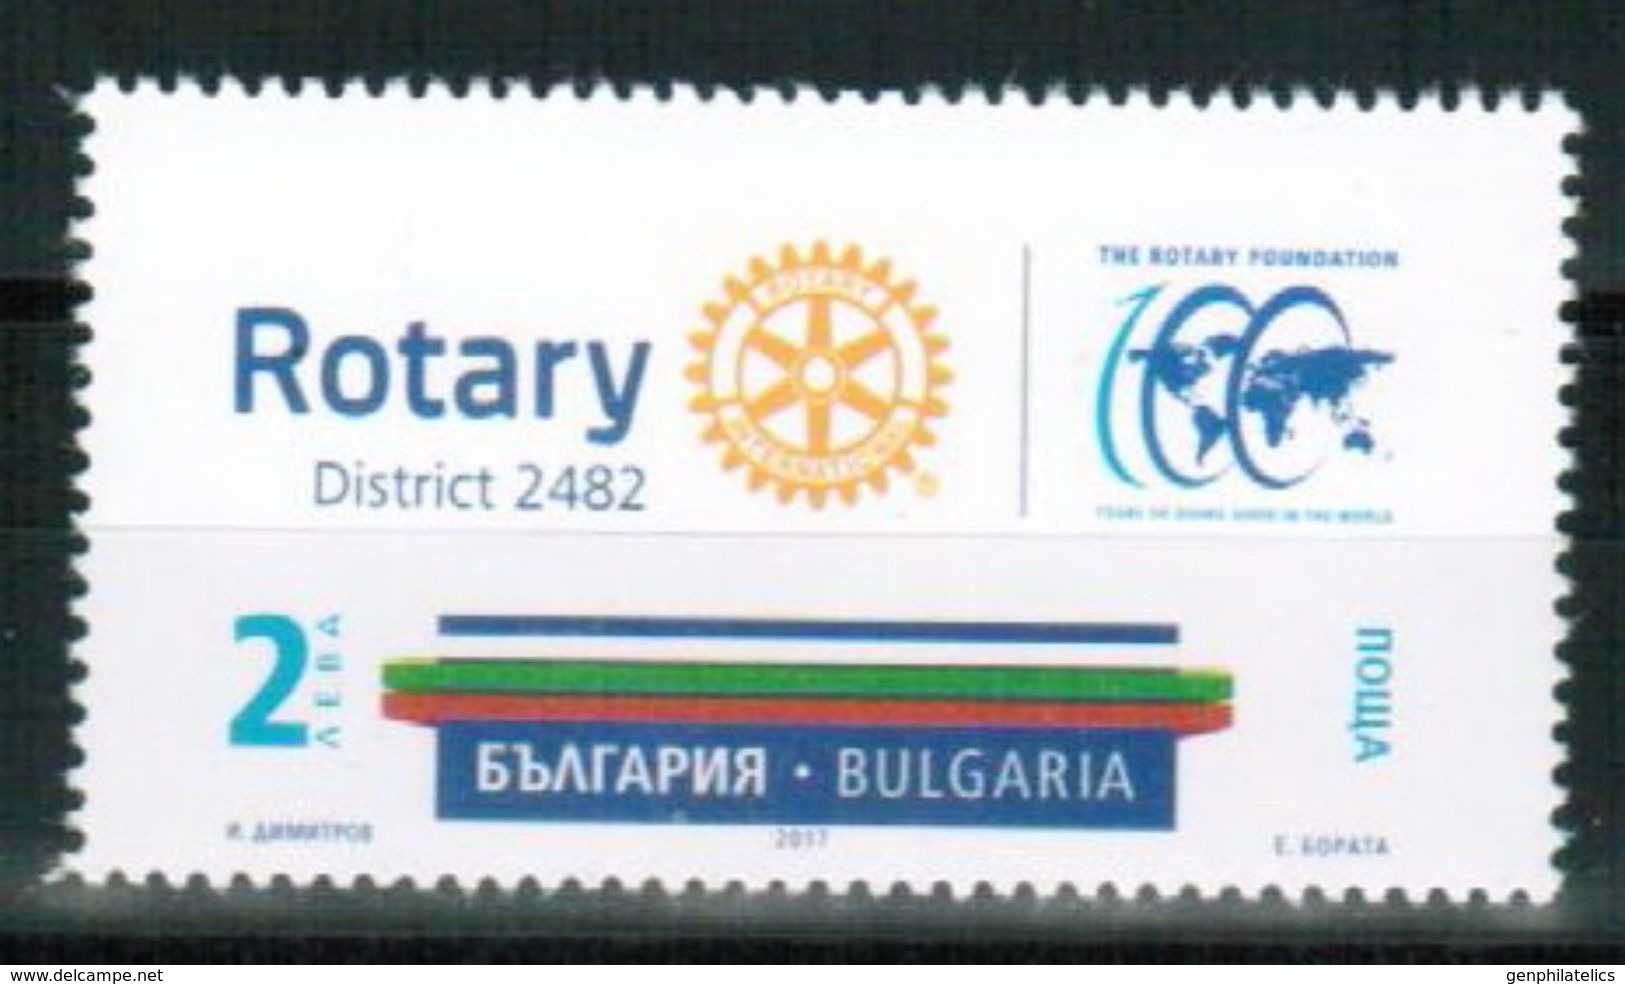 BULGARIA 2017 EVENTS 100 Years Of ROTARY FOUNDATION - Fine Stamp MNH - Rotary, Lions Club